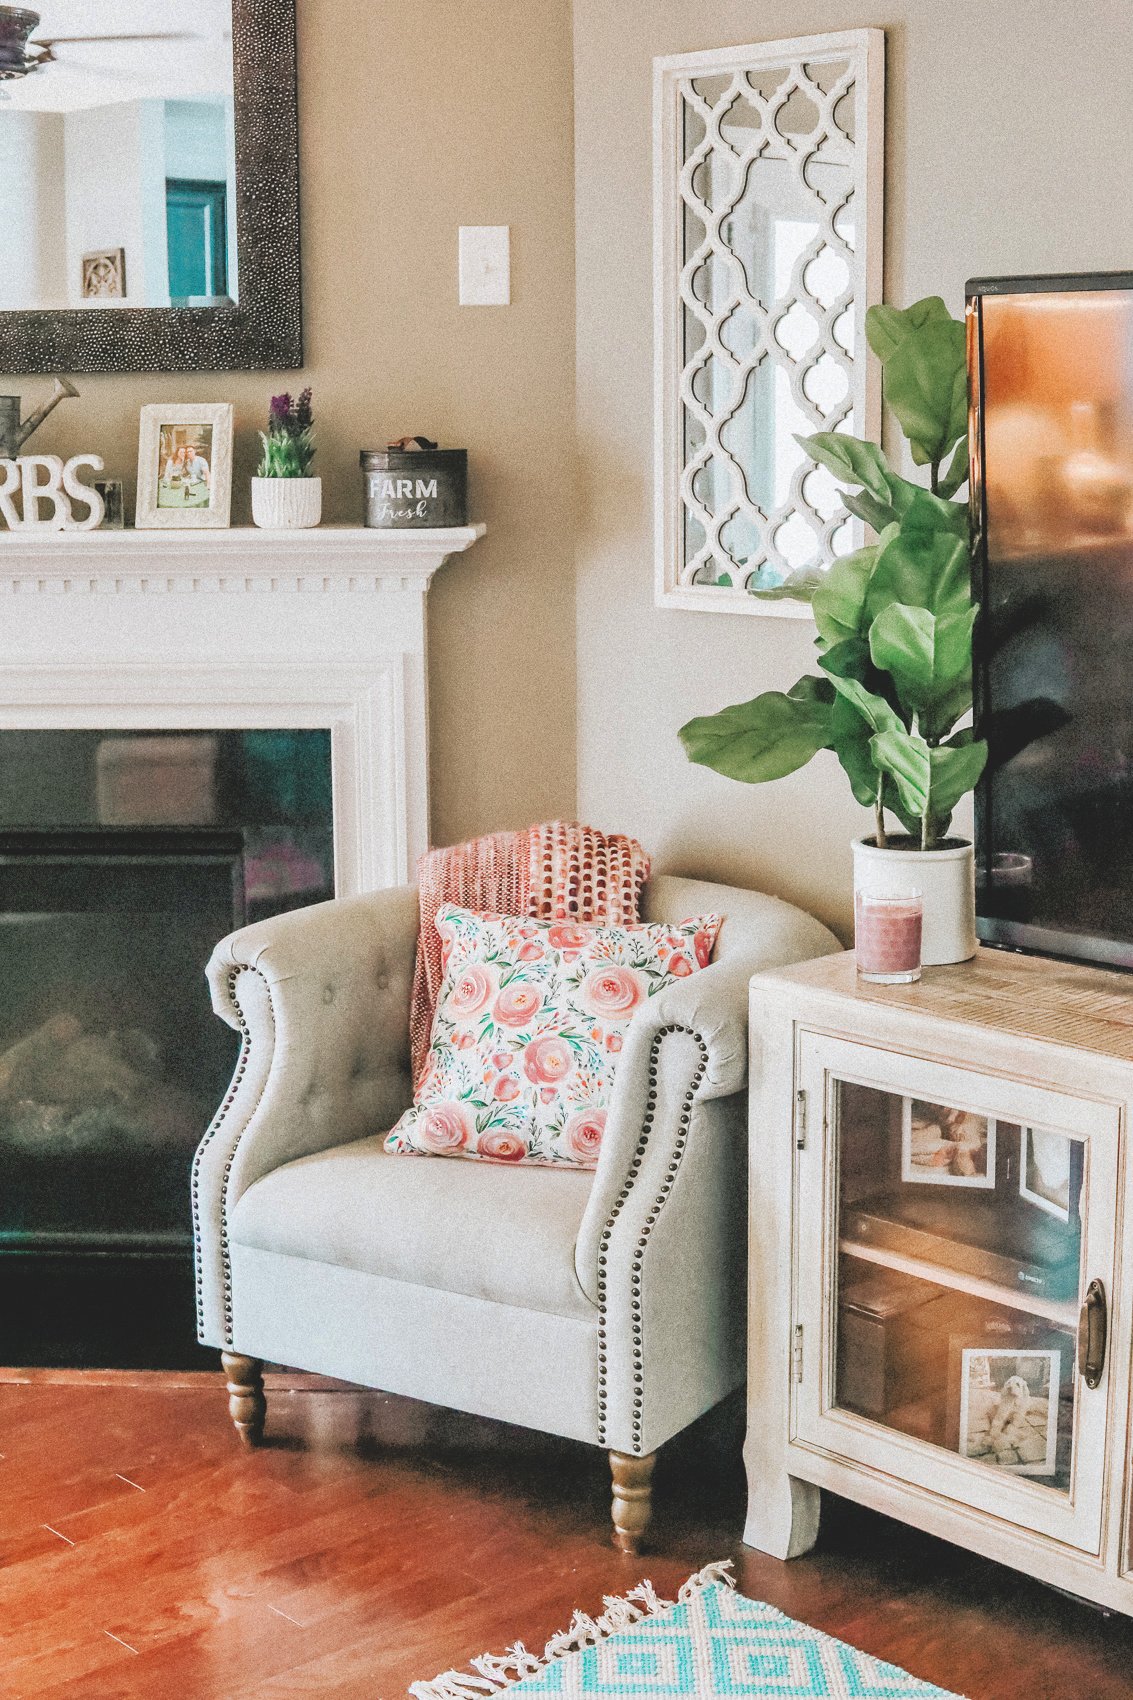 living room decor, home decor, simply taralynn, colorful, southern chic, creamy colorful living room, home decor, remodel, colorful living room, cozy, pillows, chairs, entertainment center decor, plants, floral, vintage, home design, interior, decorations, summer feel